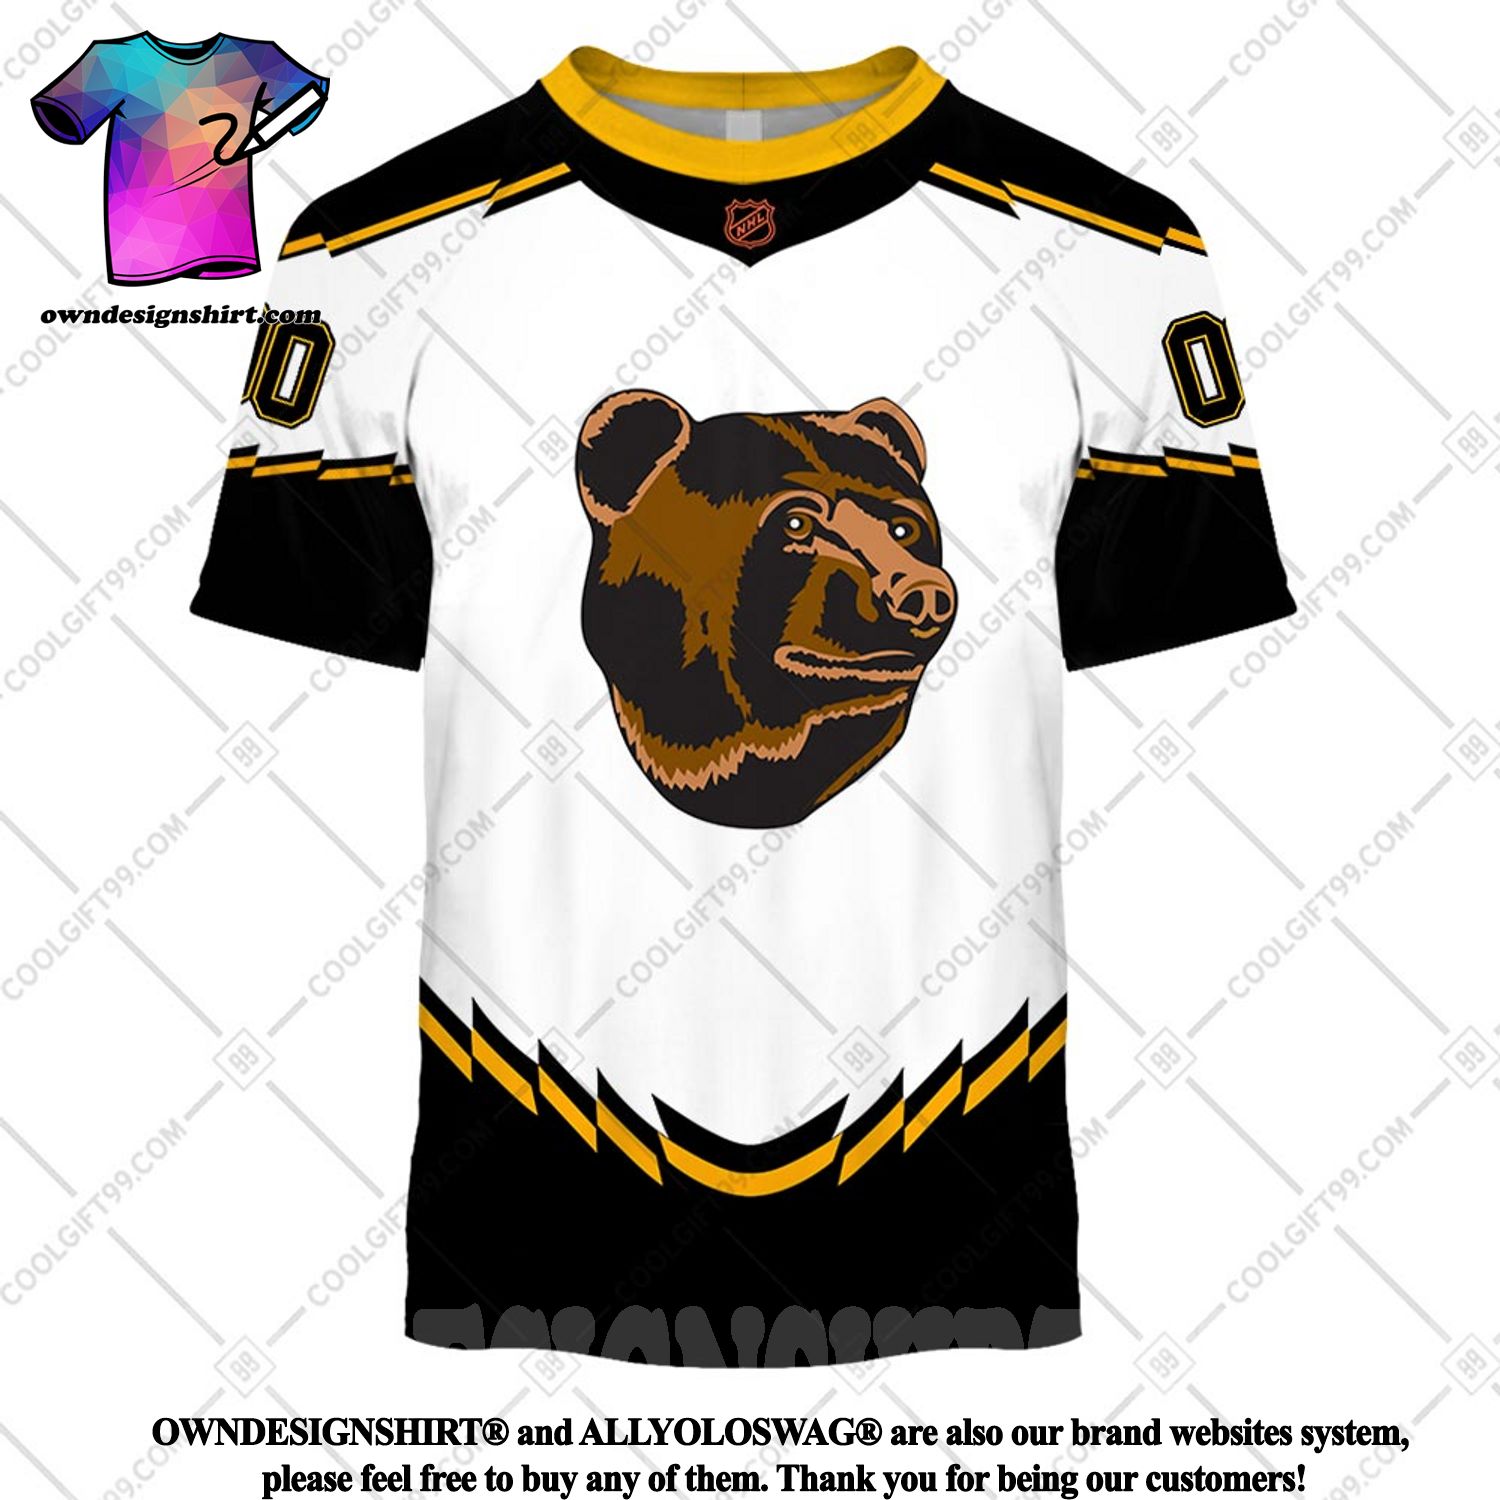 The best selling] Personalized NHL Mix 2 Teams Home jersey 2223